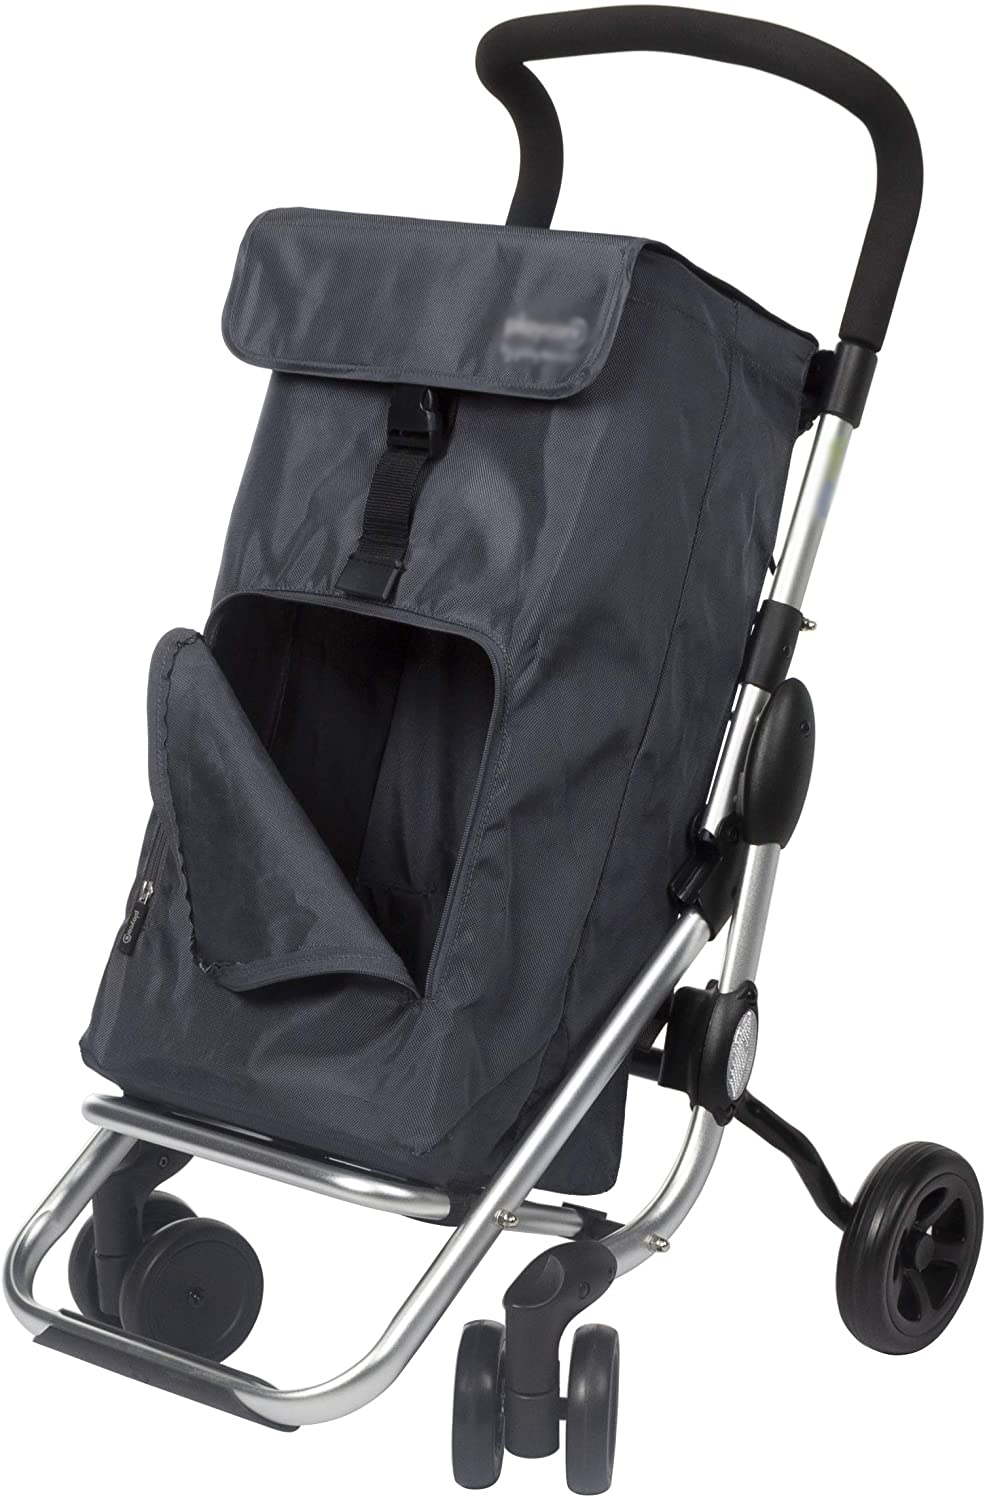 Acbags Folding Shopping Cart with Swivel Wheels, Gris Marengo